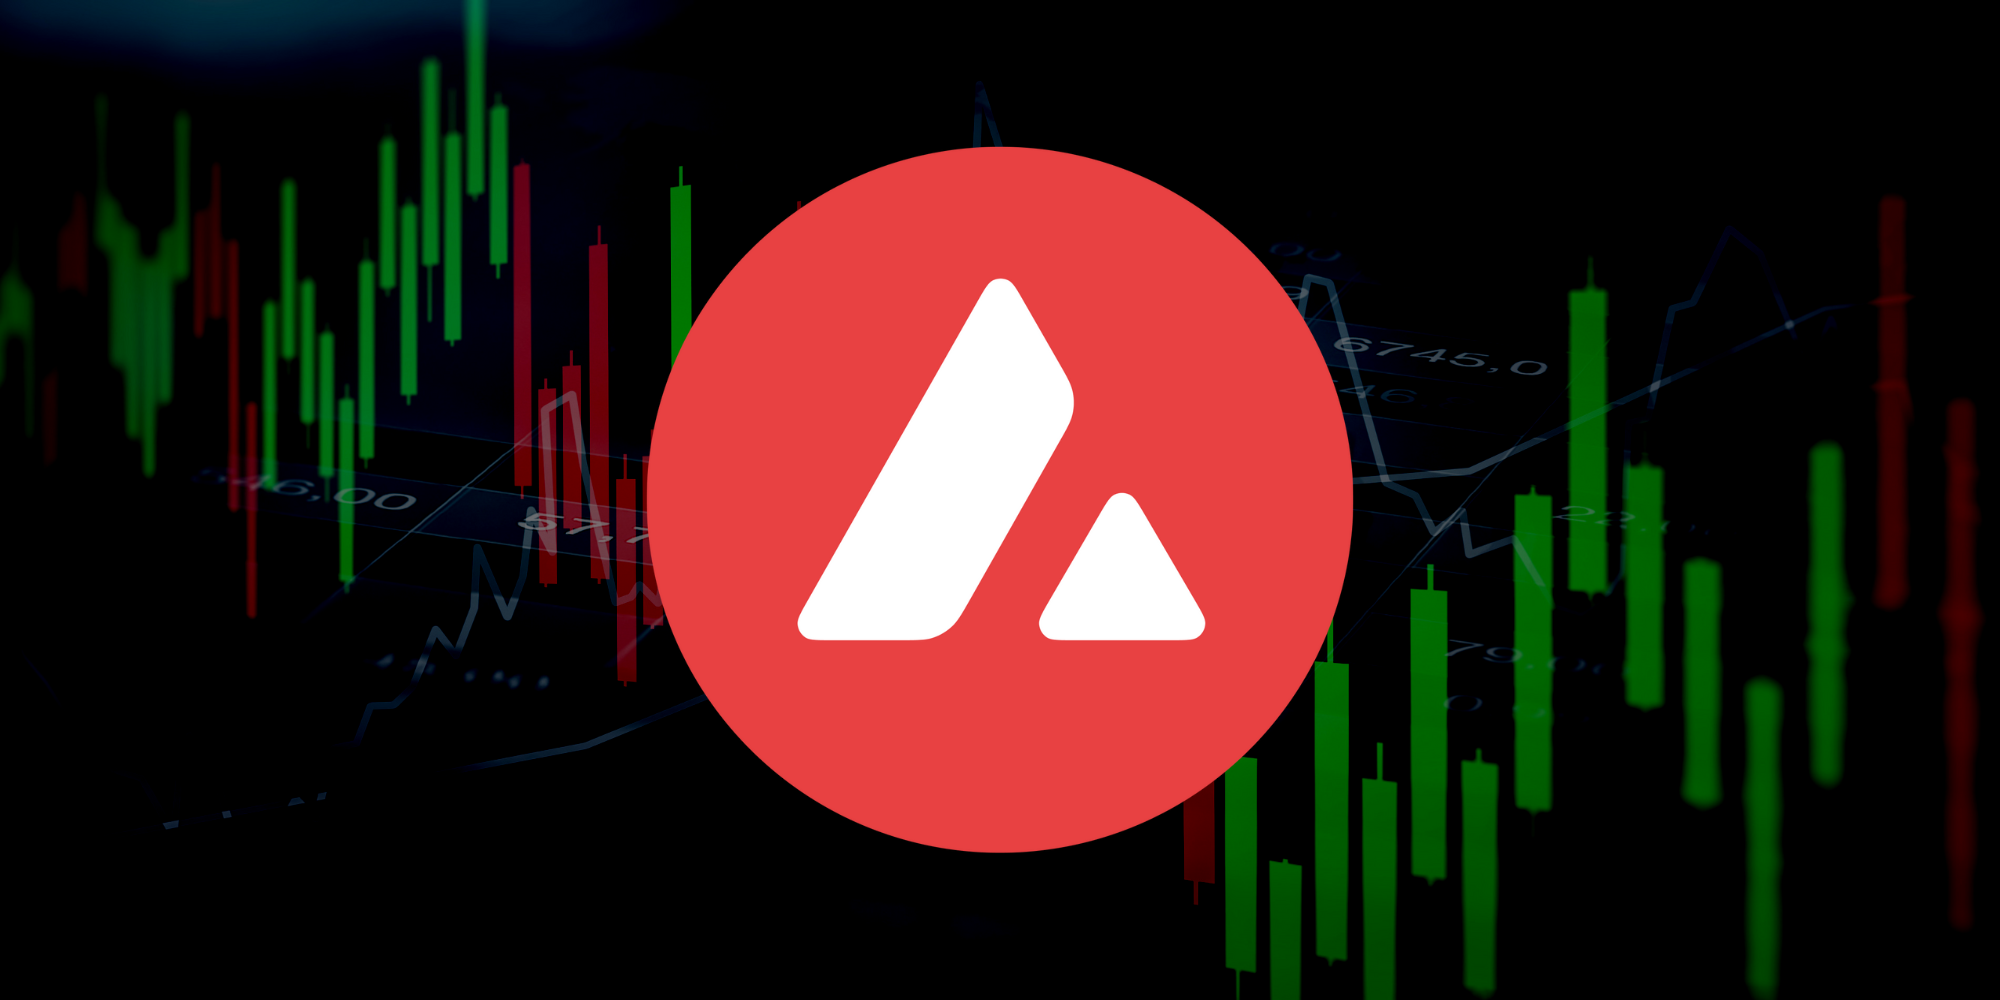 AVAX Price Analysis 2022: Is It a Good Time to Buy AVAX? - CoinCentral